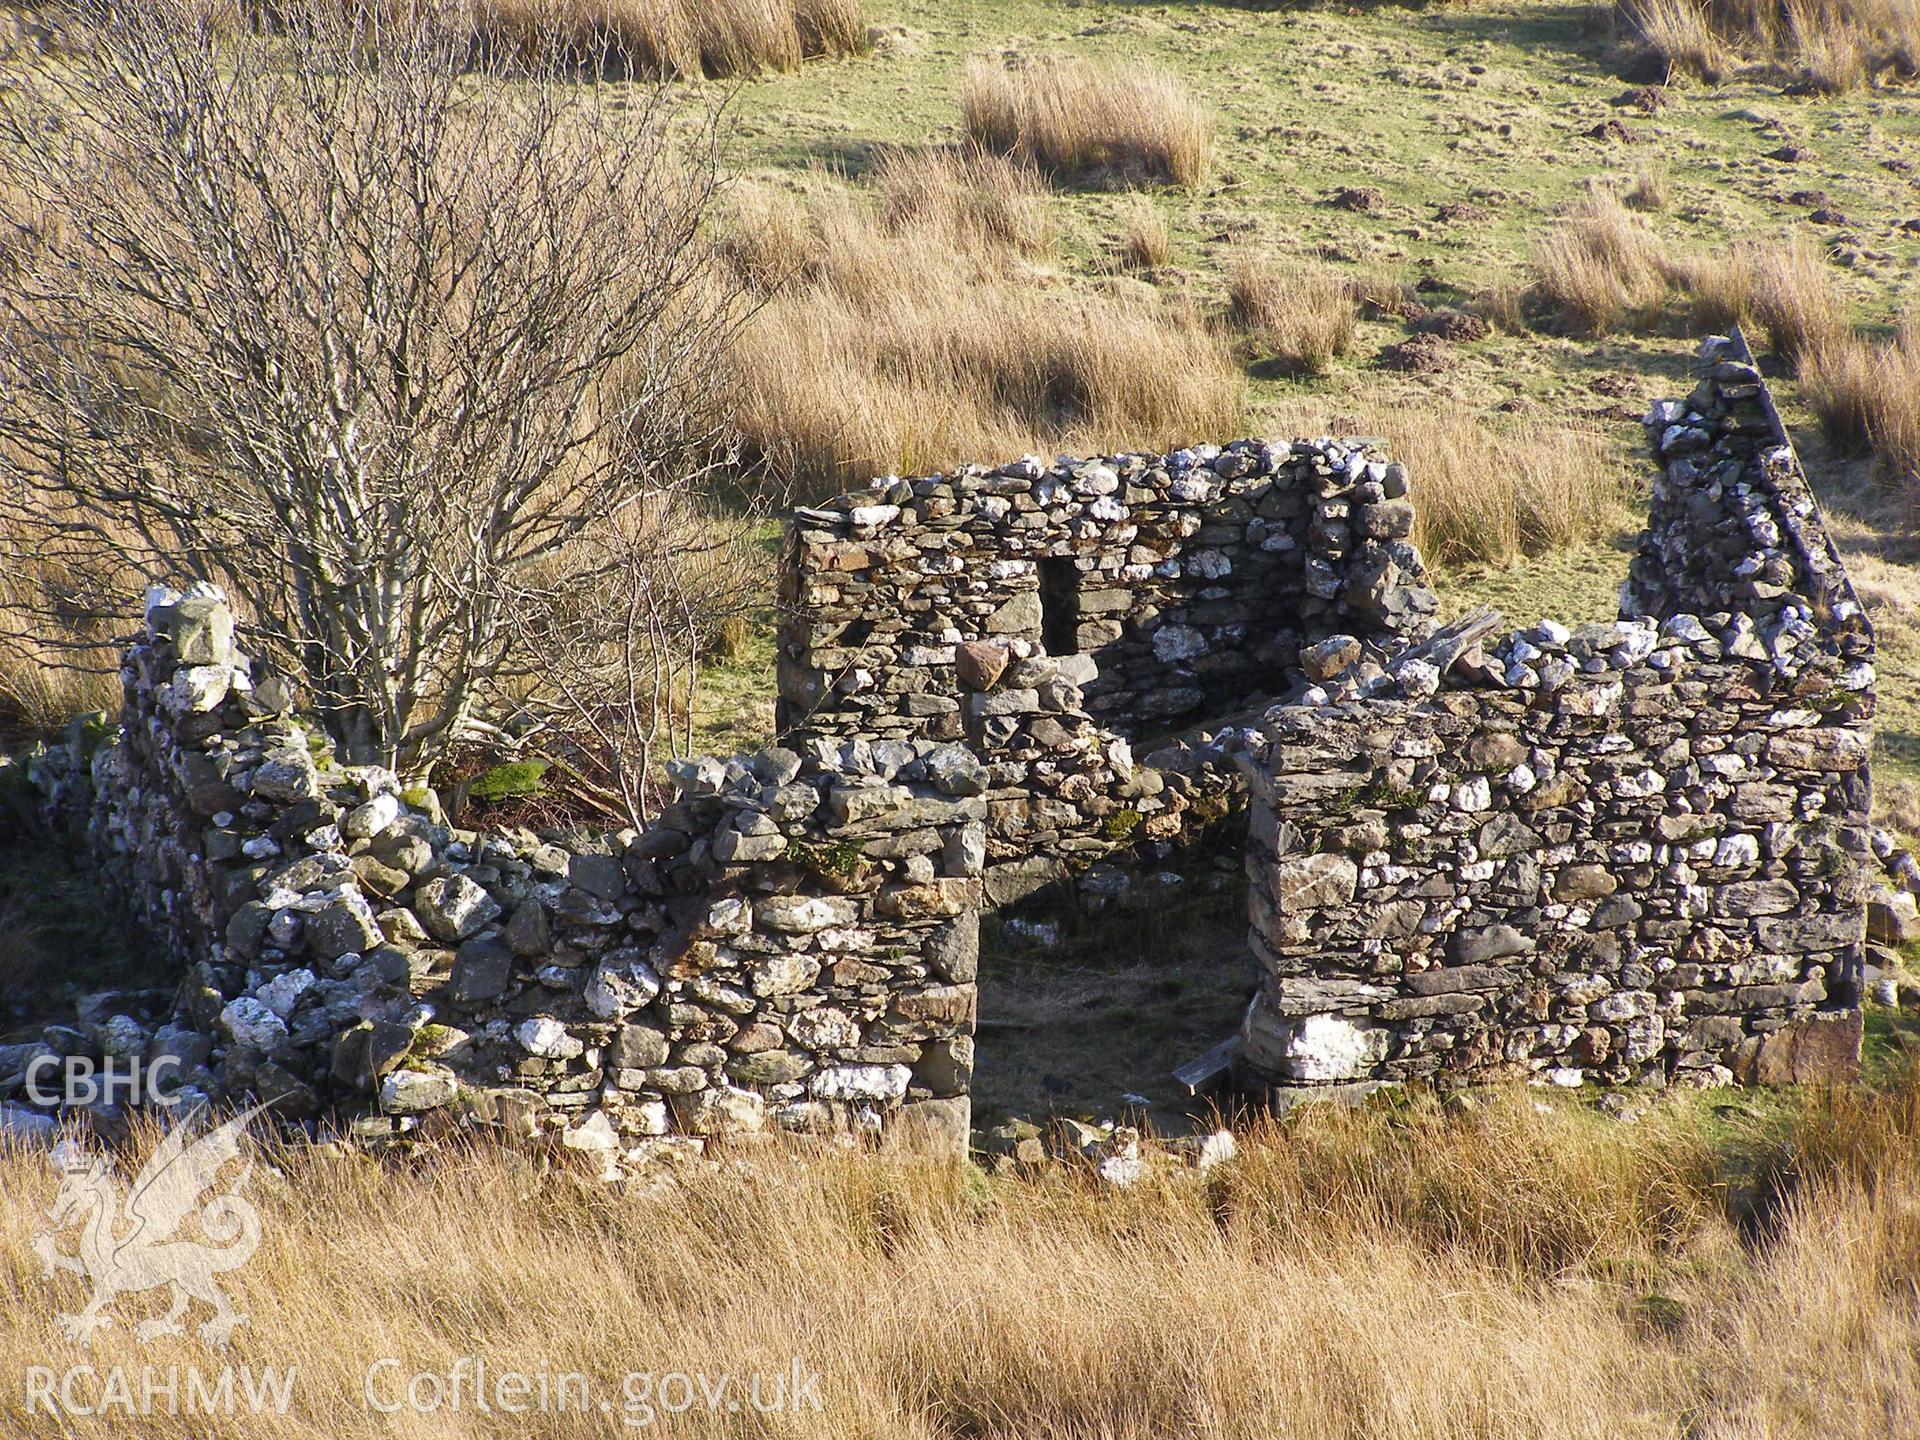 Photograph of Clogwynygarreg Farm Building taken on 30/01/2006 by P.J. Schofield during an Upland Survey undertaken by Oxford Archaeology North.